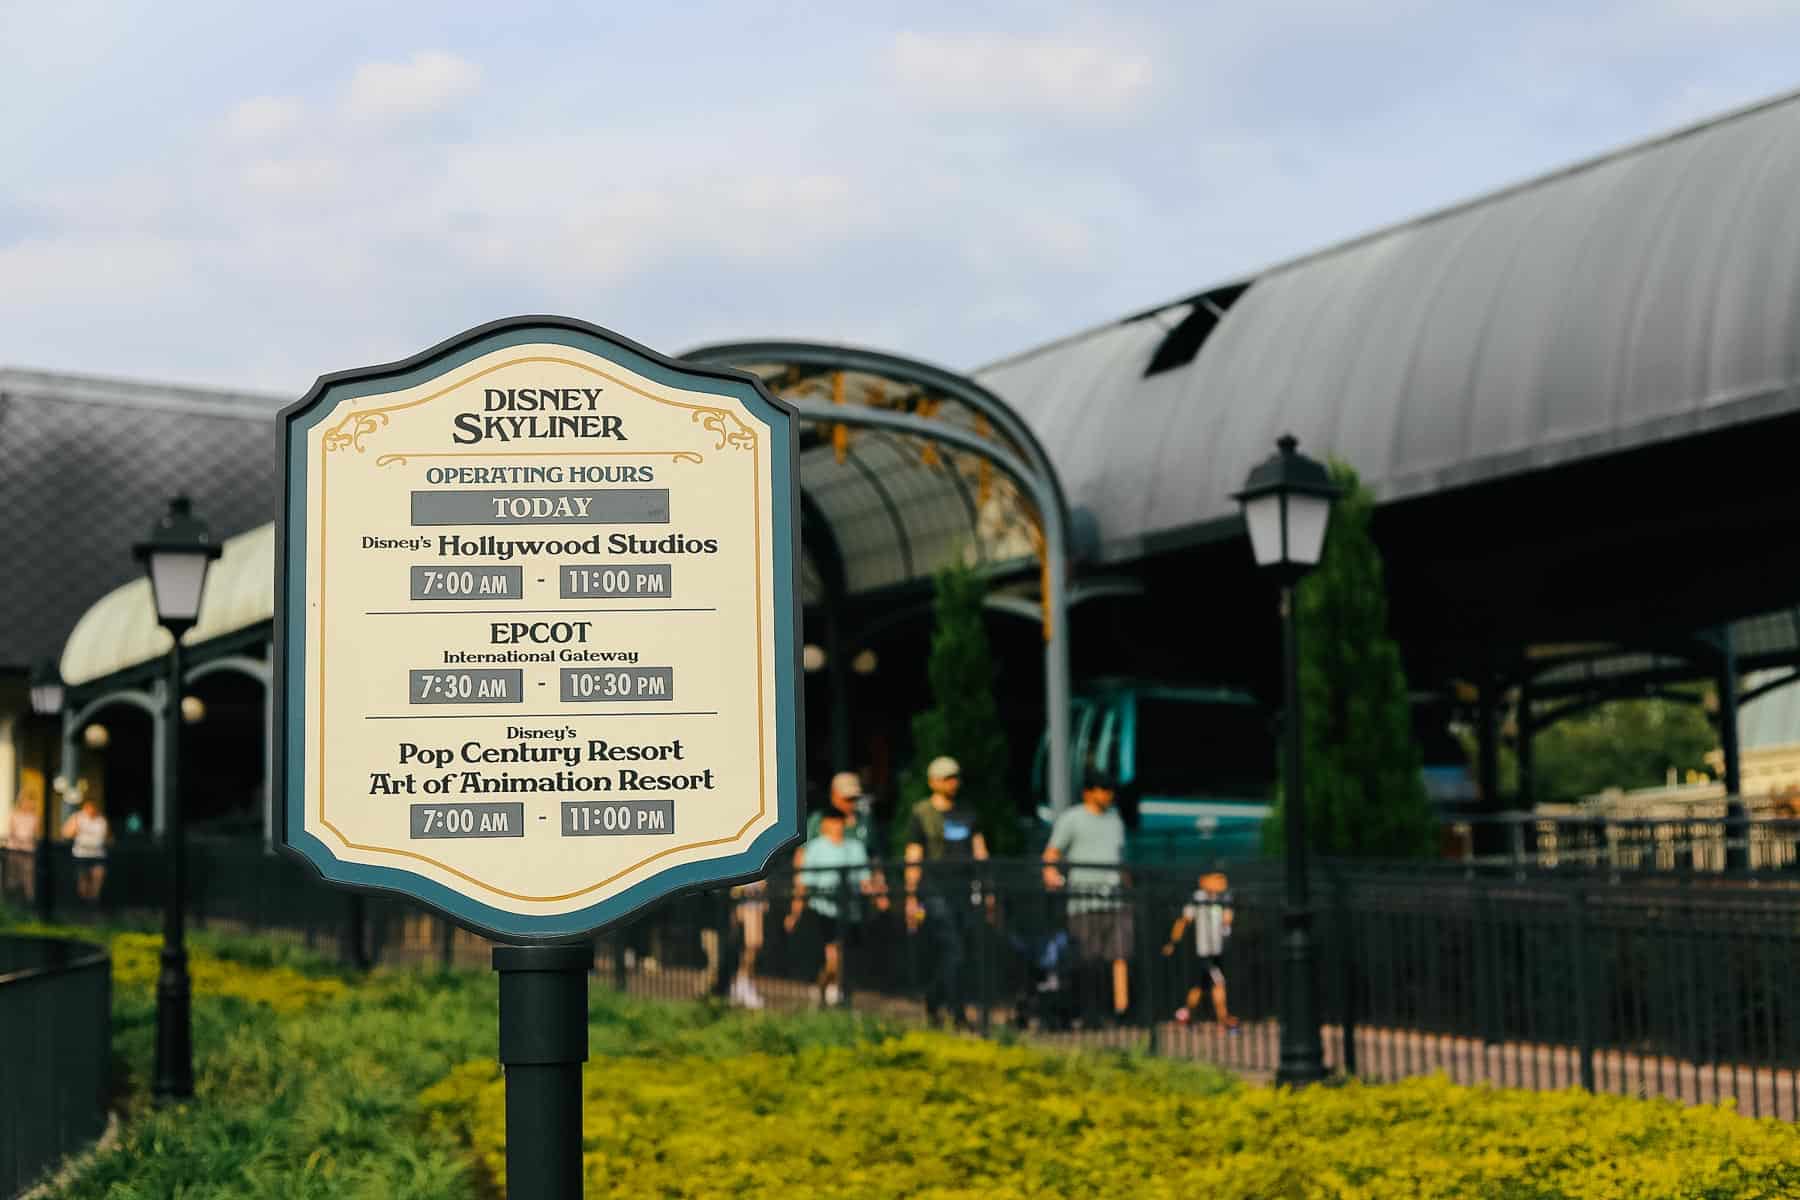  sign with the Skyliner's operating hours for the day 